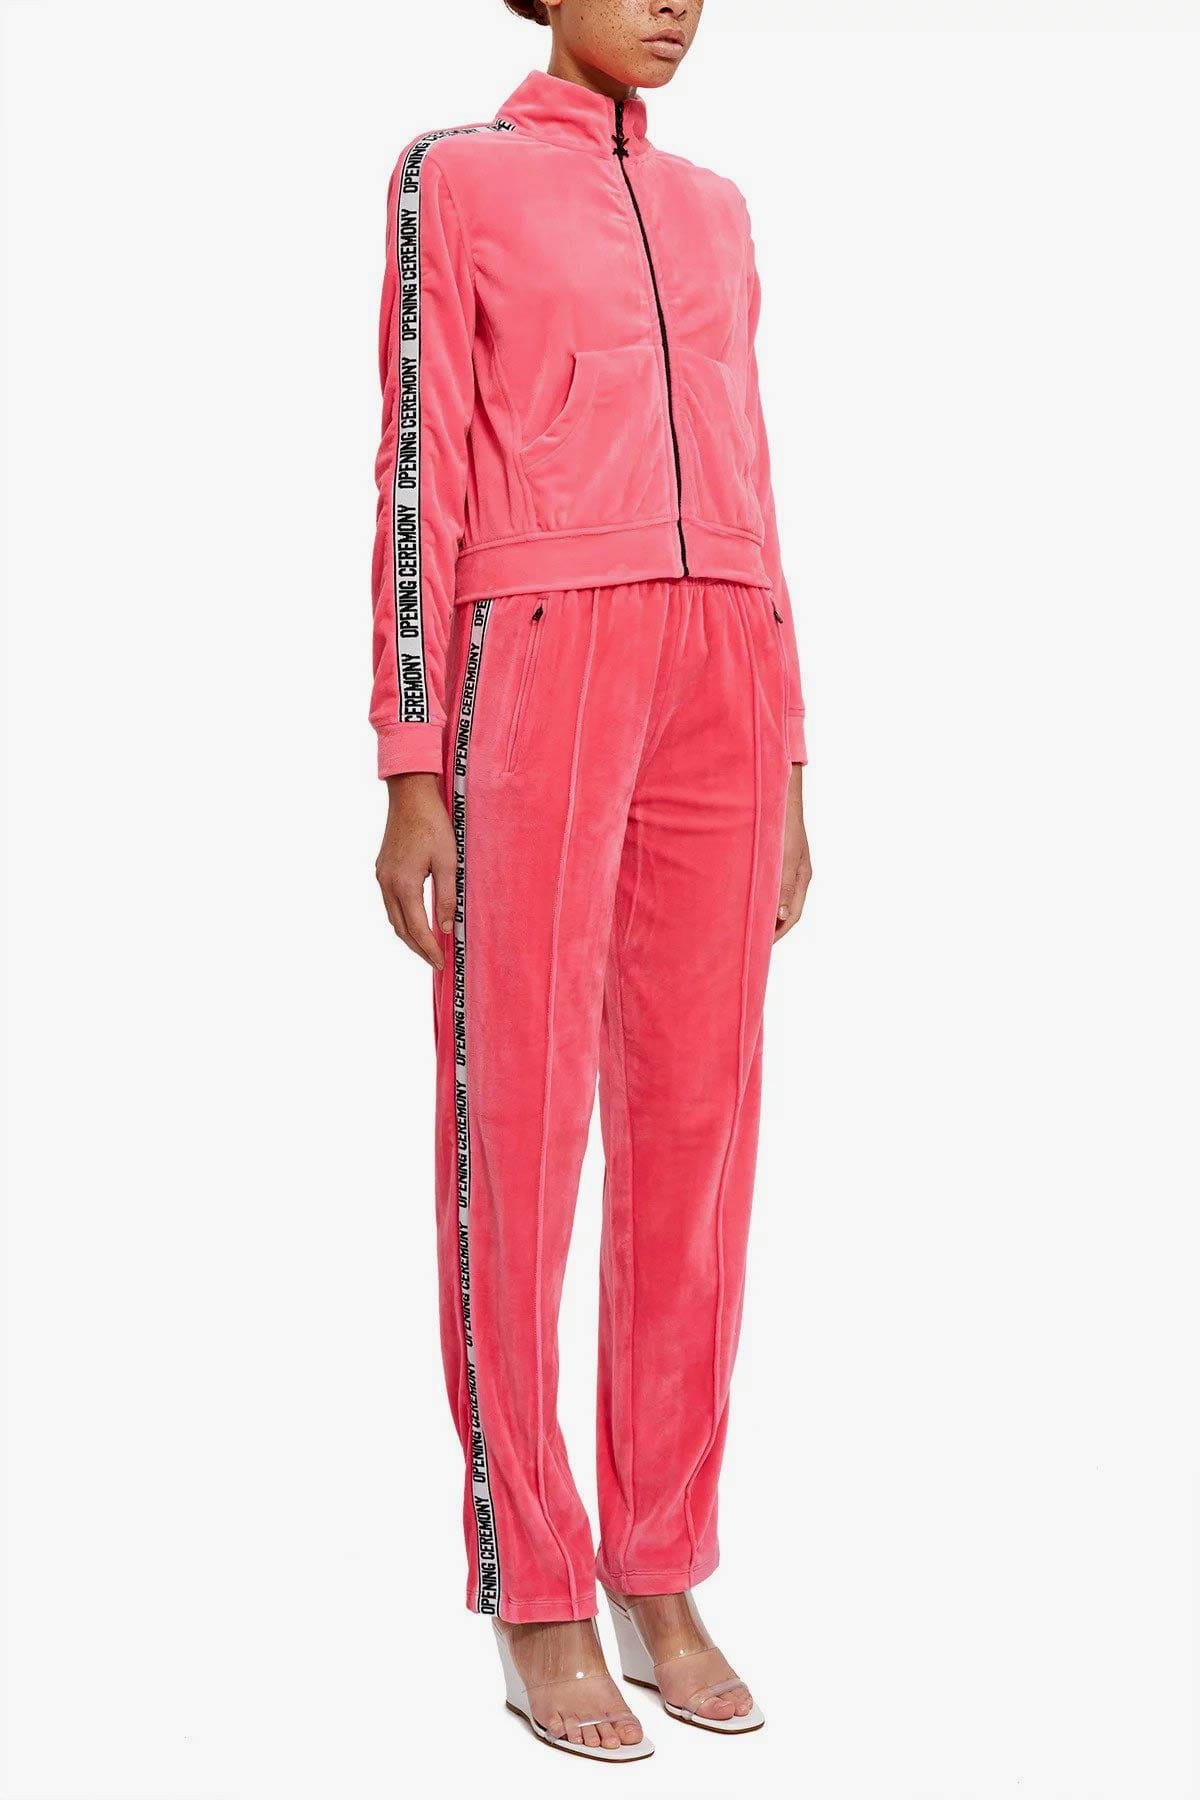 Opening Ceremony's TORCH Pink Tracksuit 